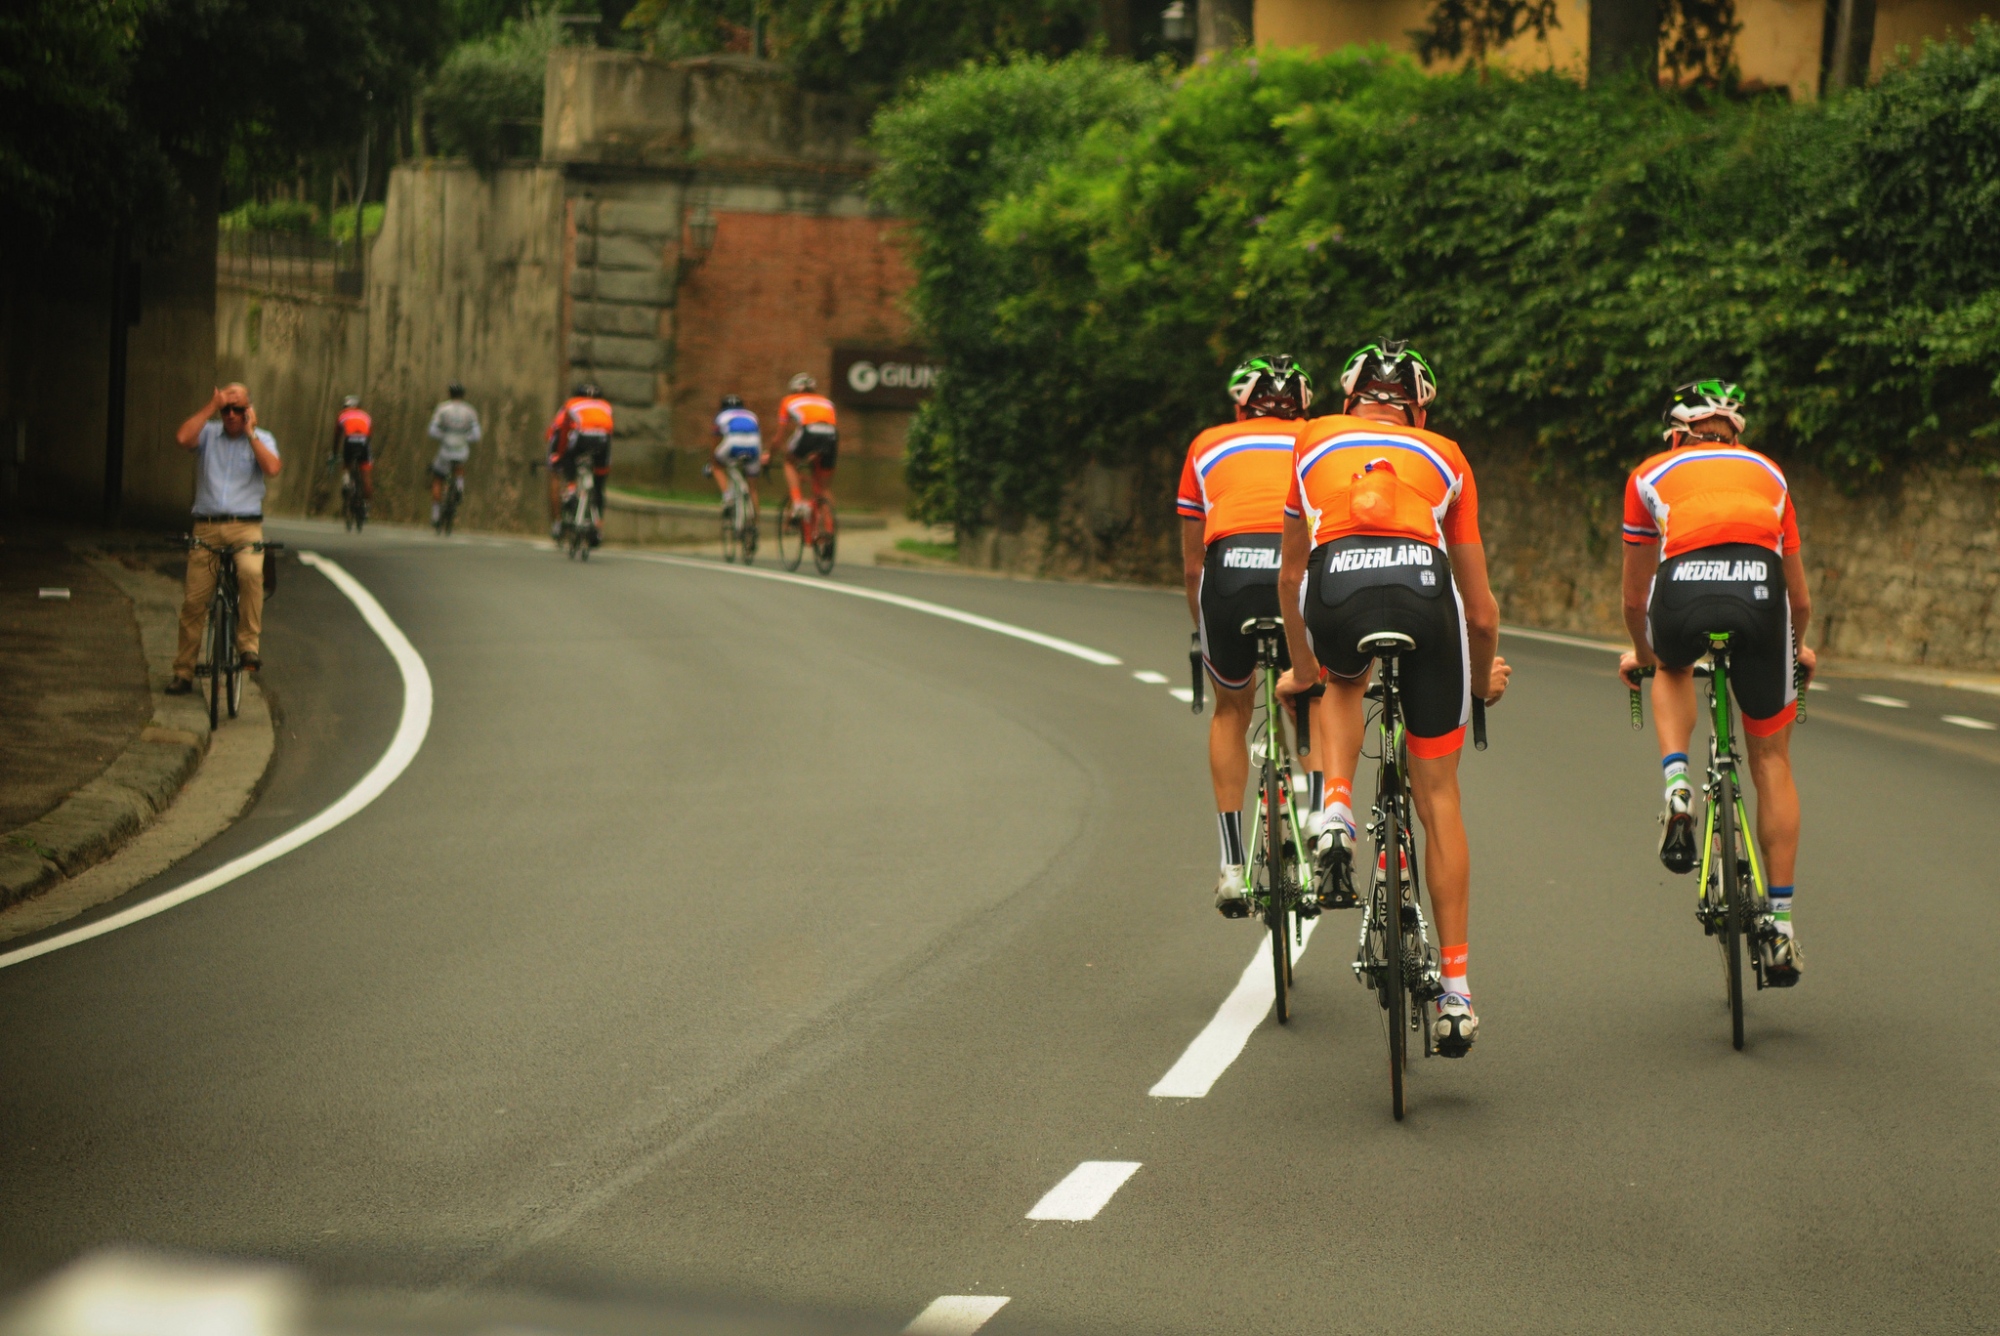 2013 World Cycling Championships in Tuscany